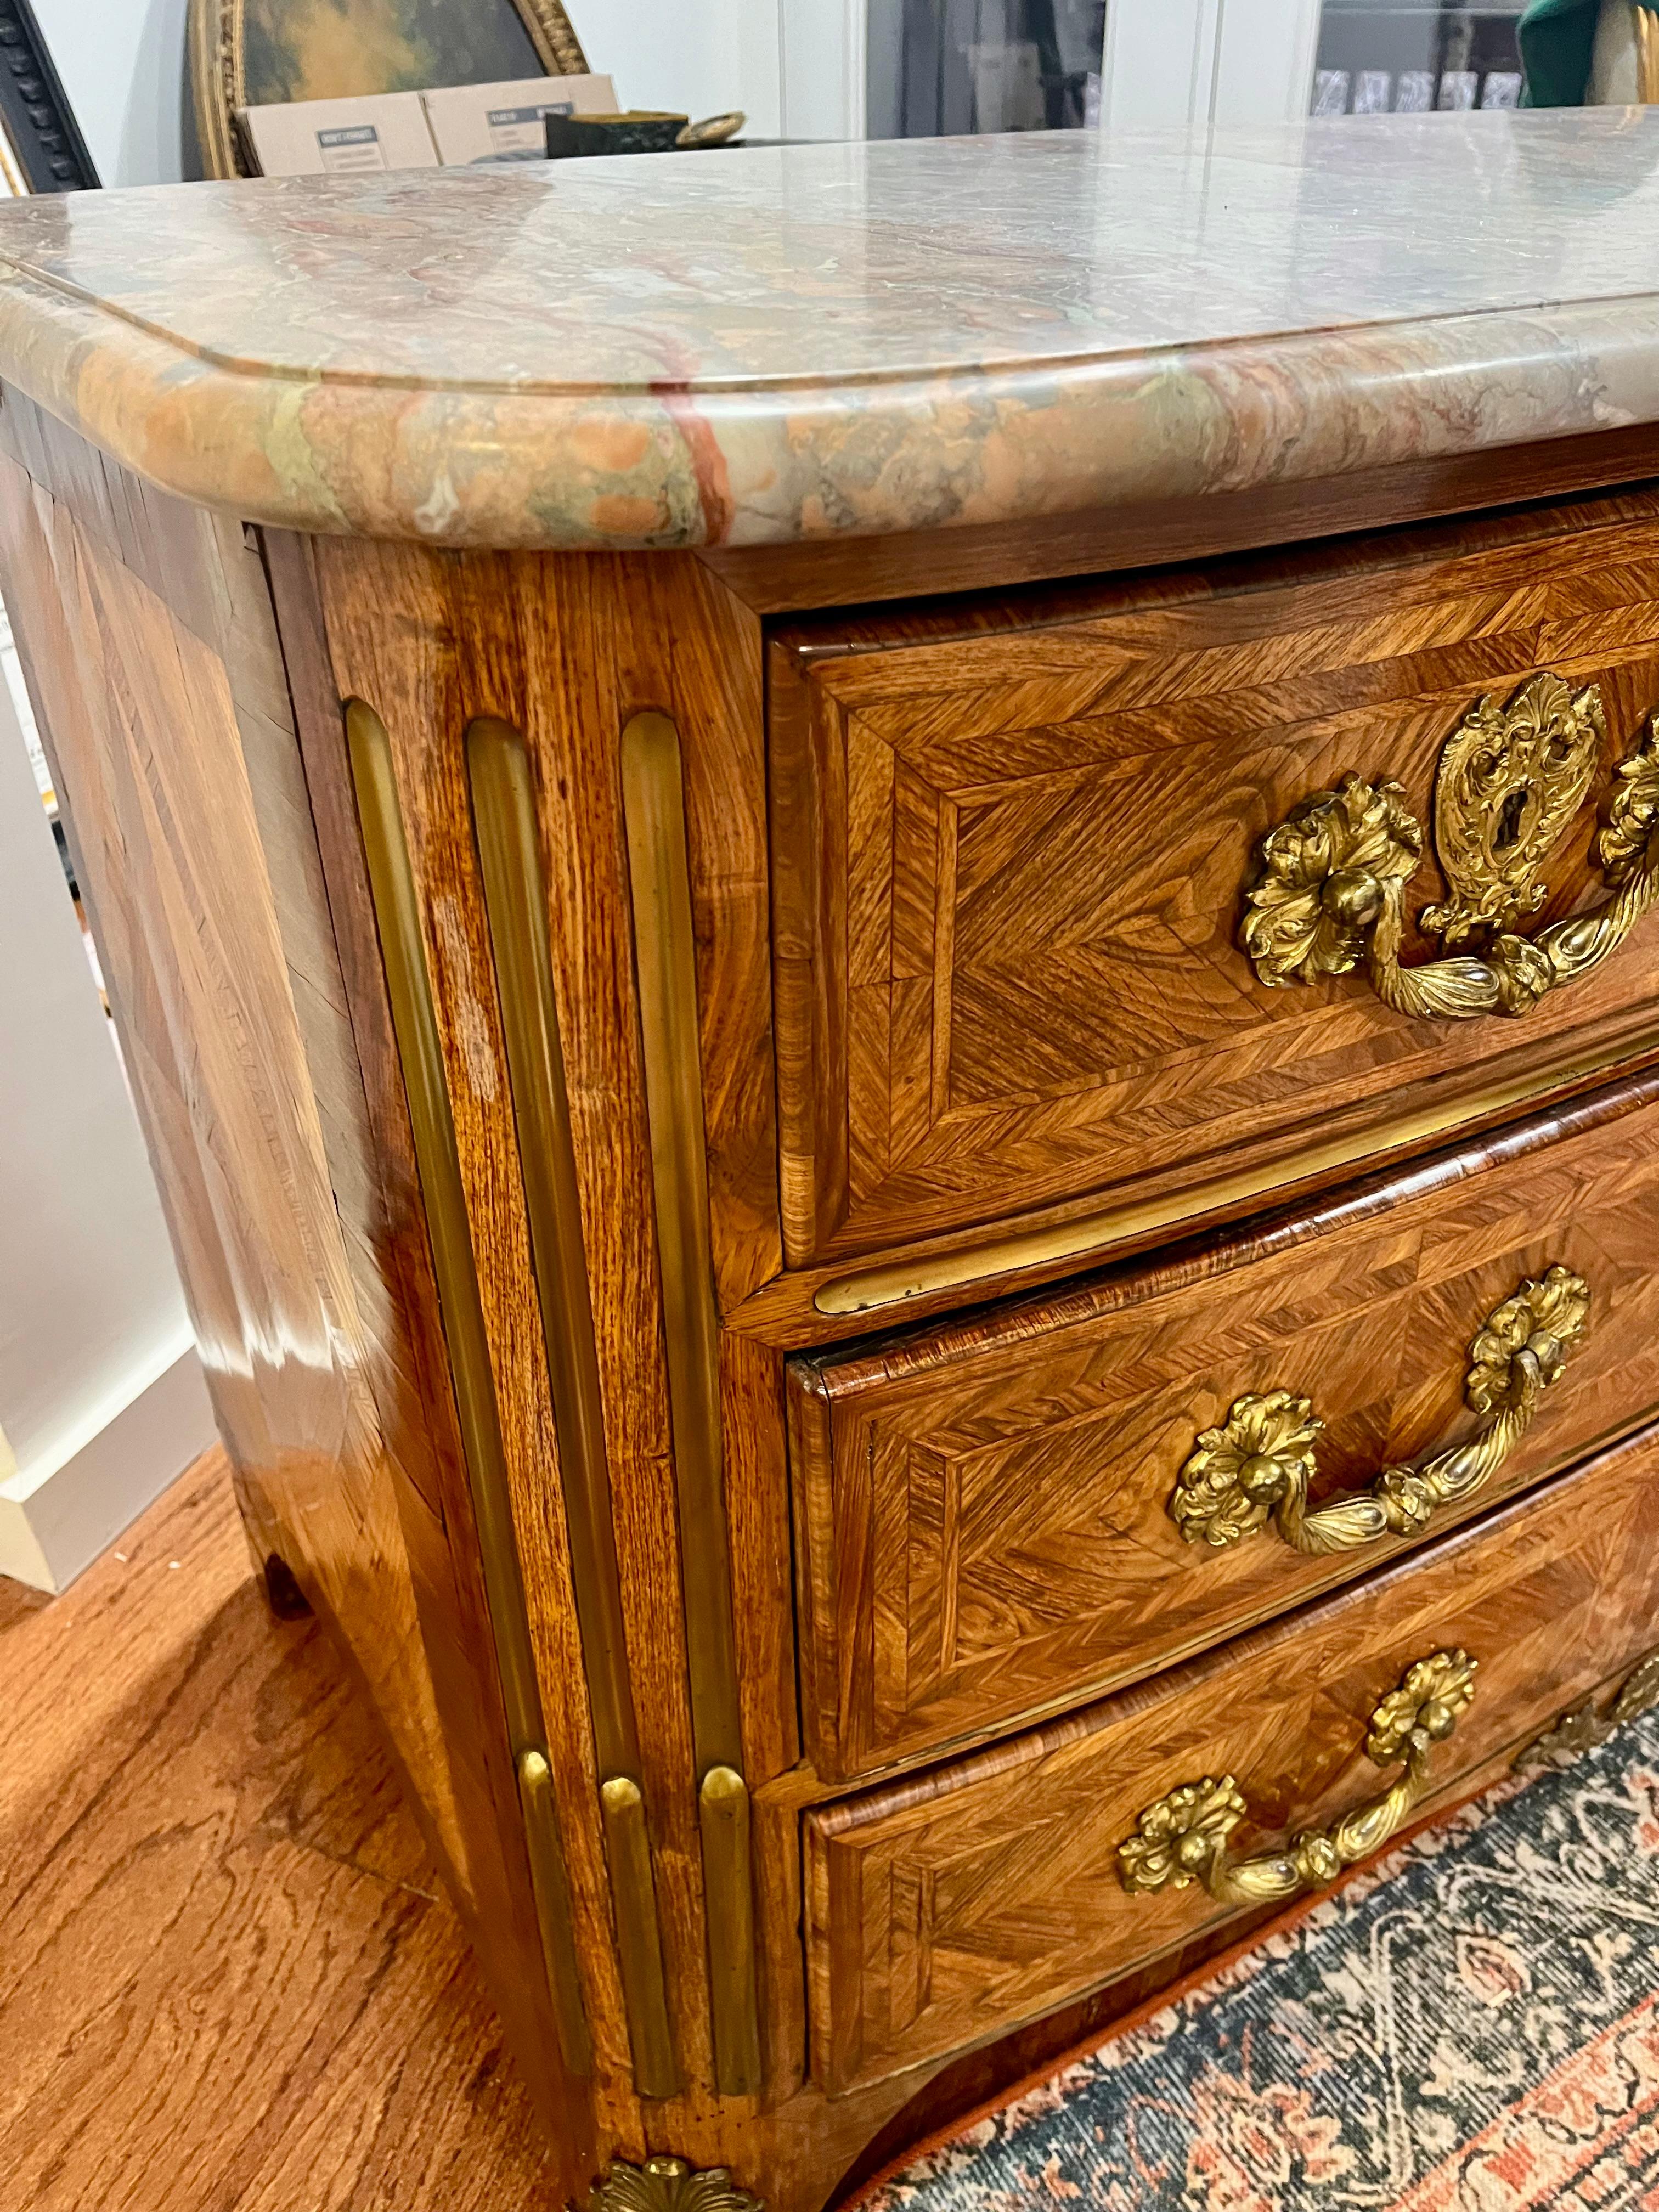 French Regence Tulipwood and Kingwood Parquetry Commode For Sale 2